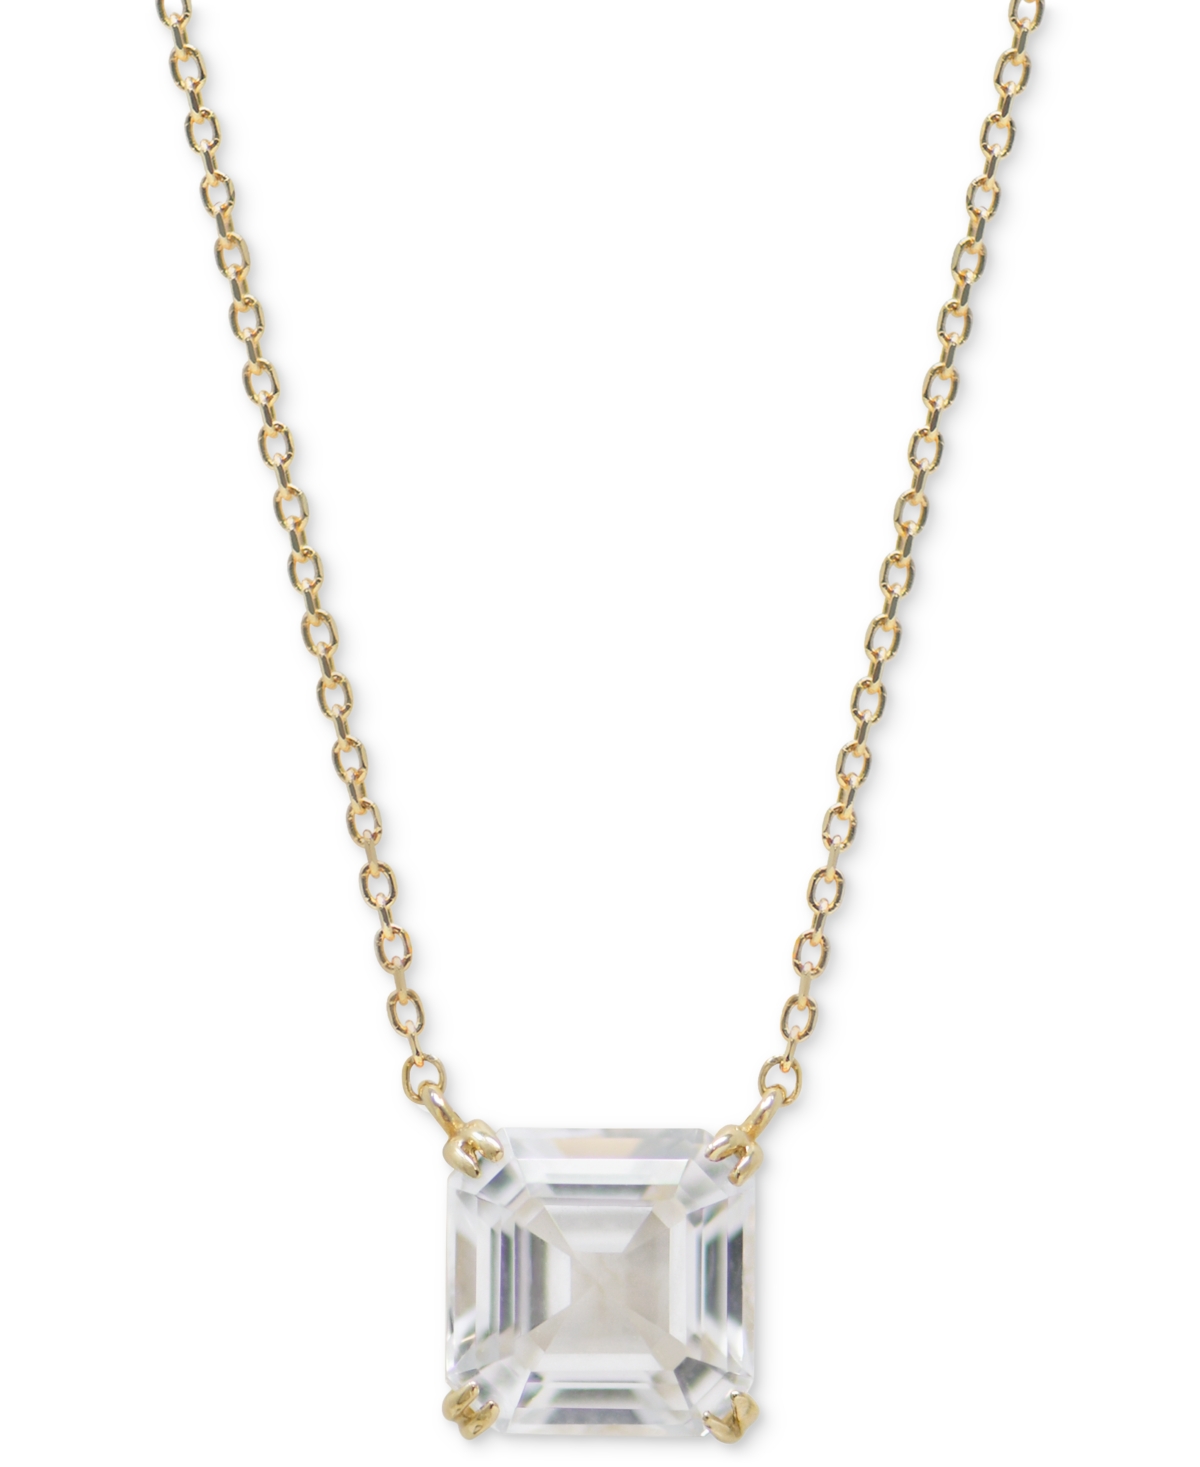 Jac & Jo by Anzie White Topaz Ascher-Cut Solitaire Pendant Necklace (2-1/6 ct. t.w.) in 14k Gold, 16" + 1" extender - White Topaz